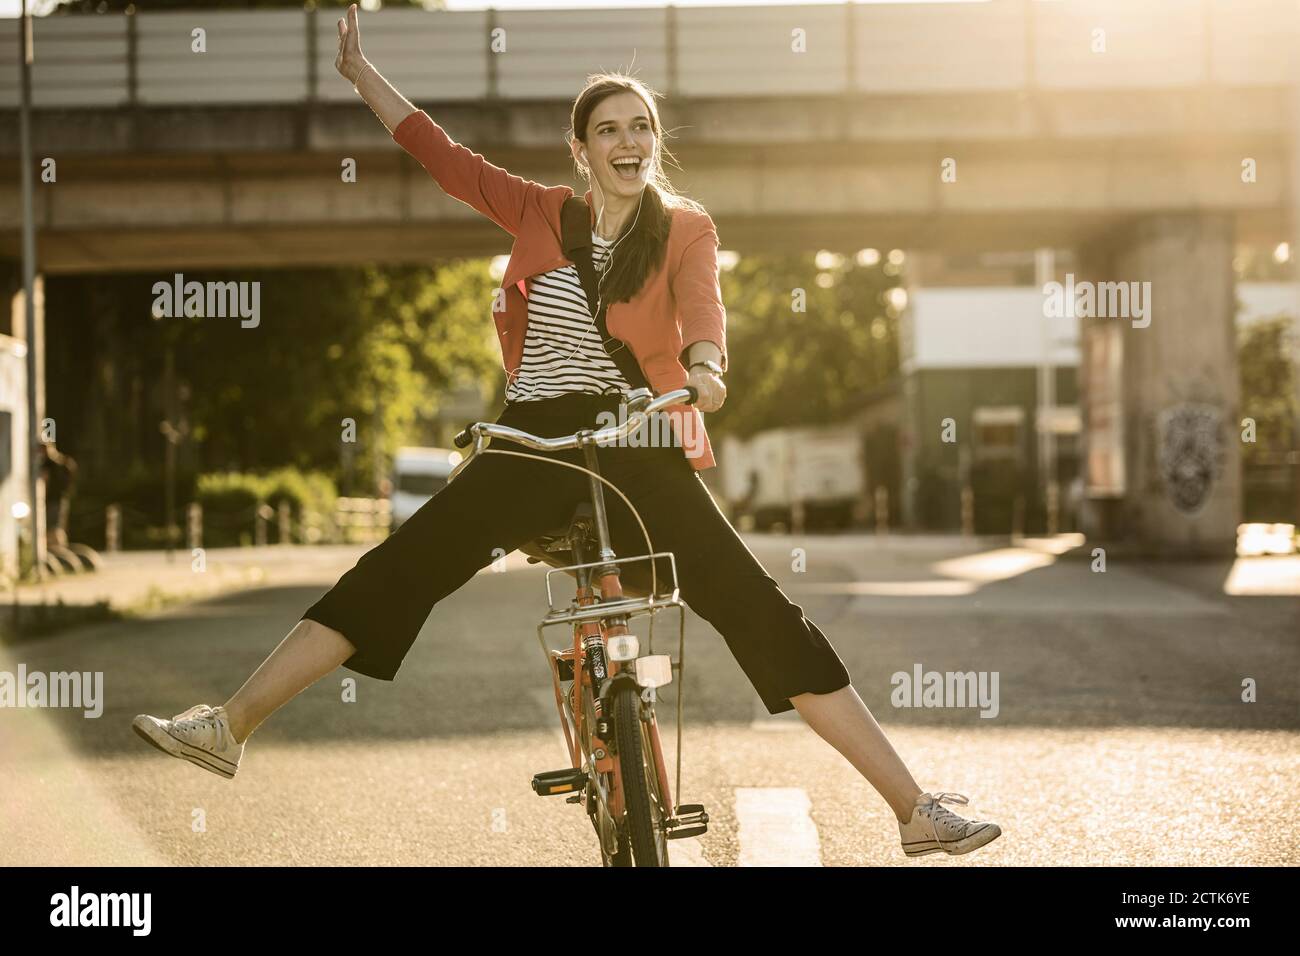 Cheerful woman enjoying cycling on street in city during sunny day Stock Photo